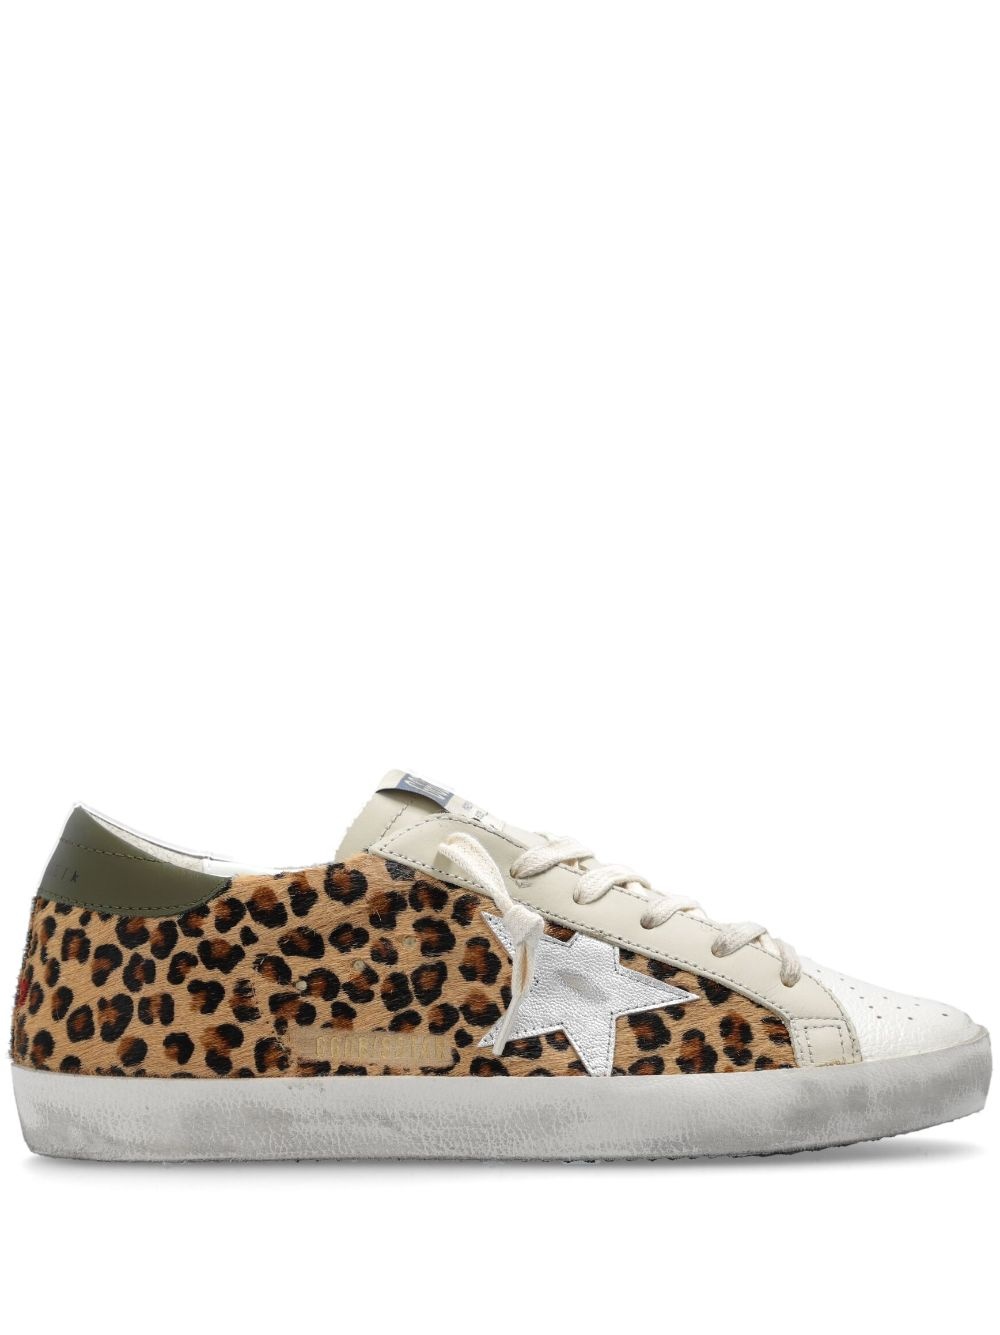 Super star leather sneakers - 1